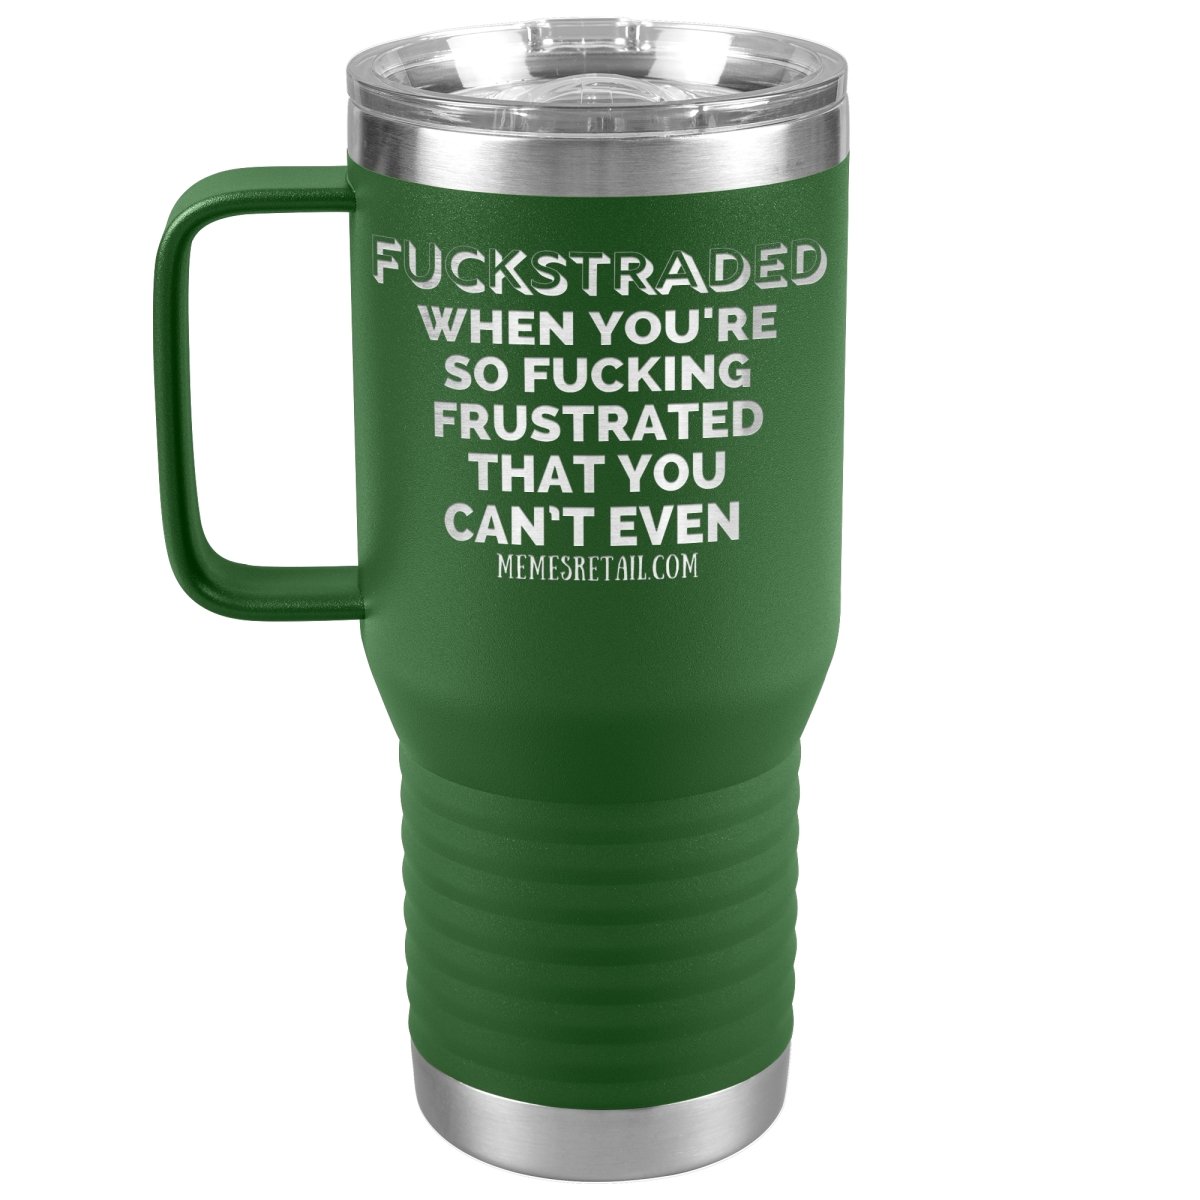 Fuckstraded, When You're So Fucking Frustrated That You Can’t Even Tumblers, 20oz Travel Tumbler / Green - MemesRetail.com